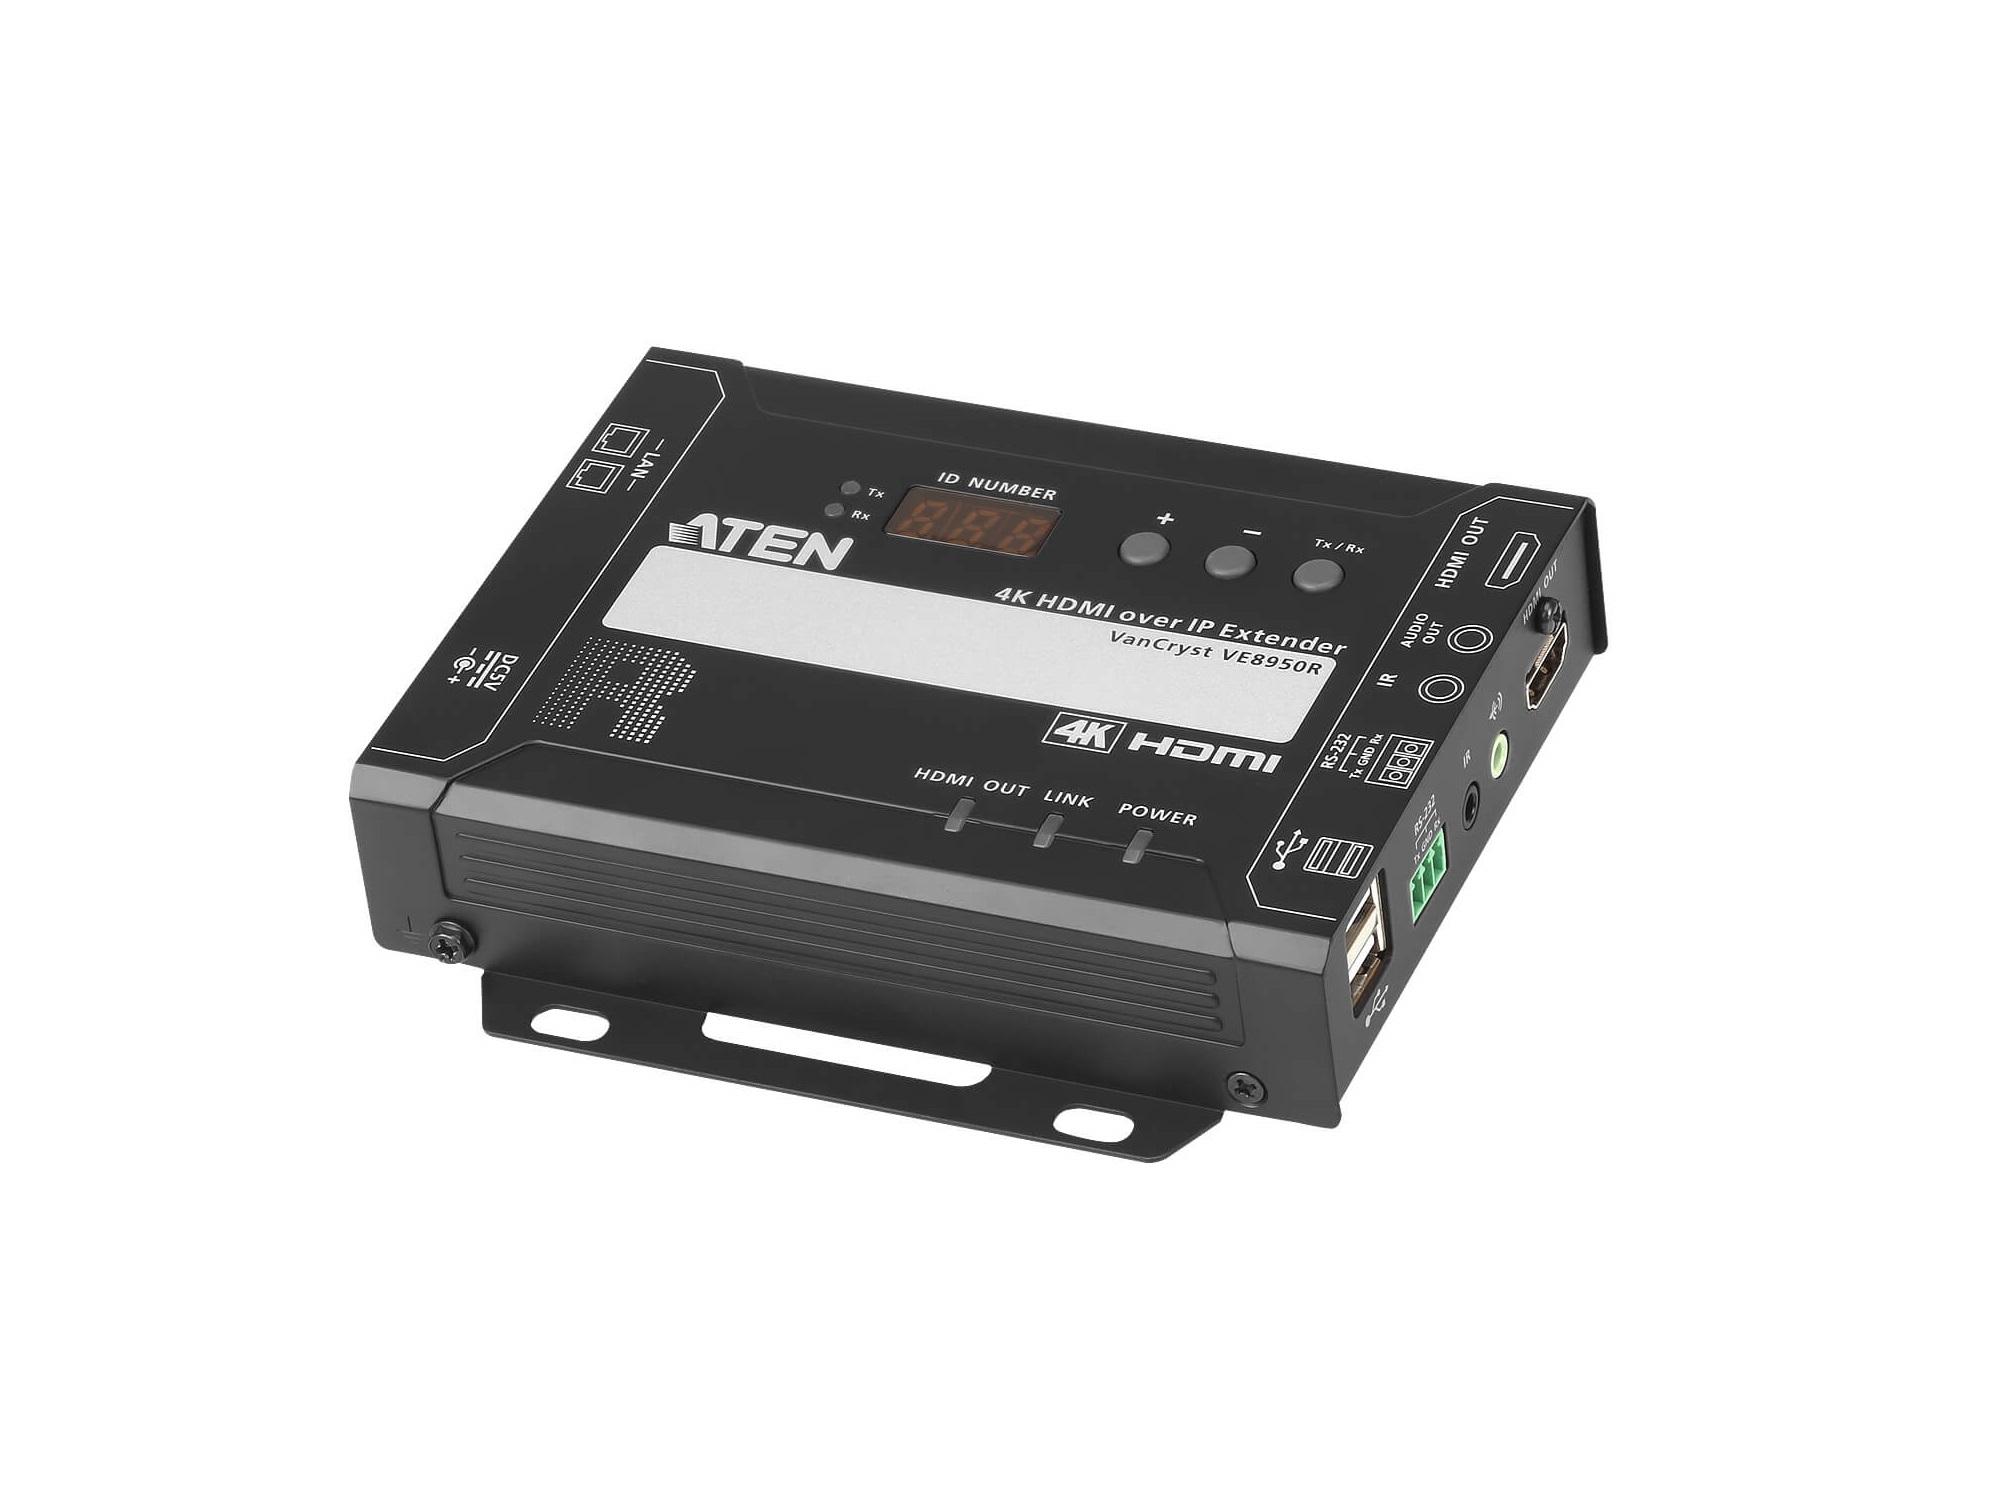 VE8950R 4K HDMI over IP Receiver by Aten